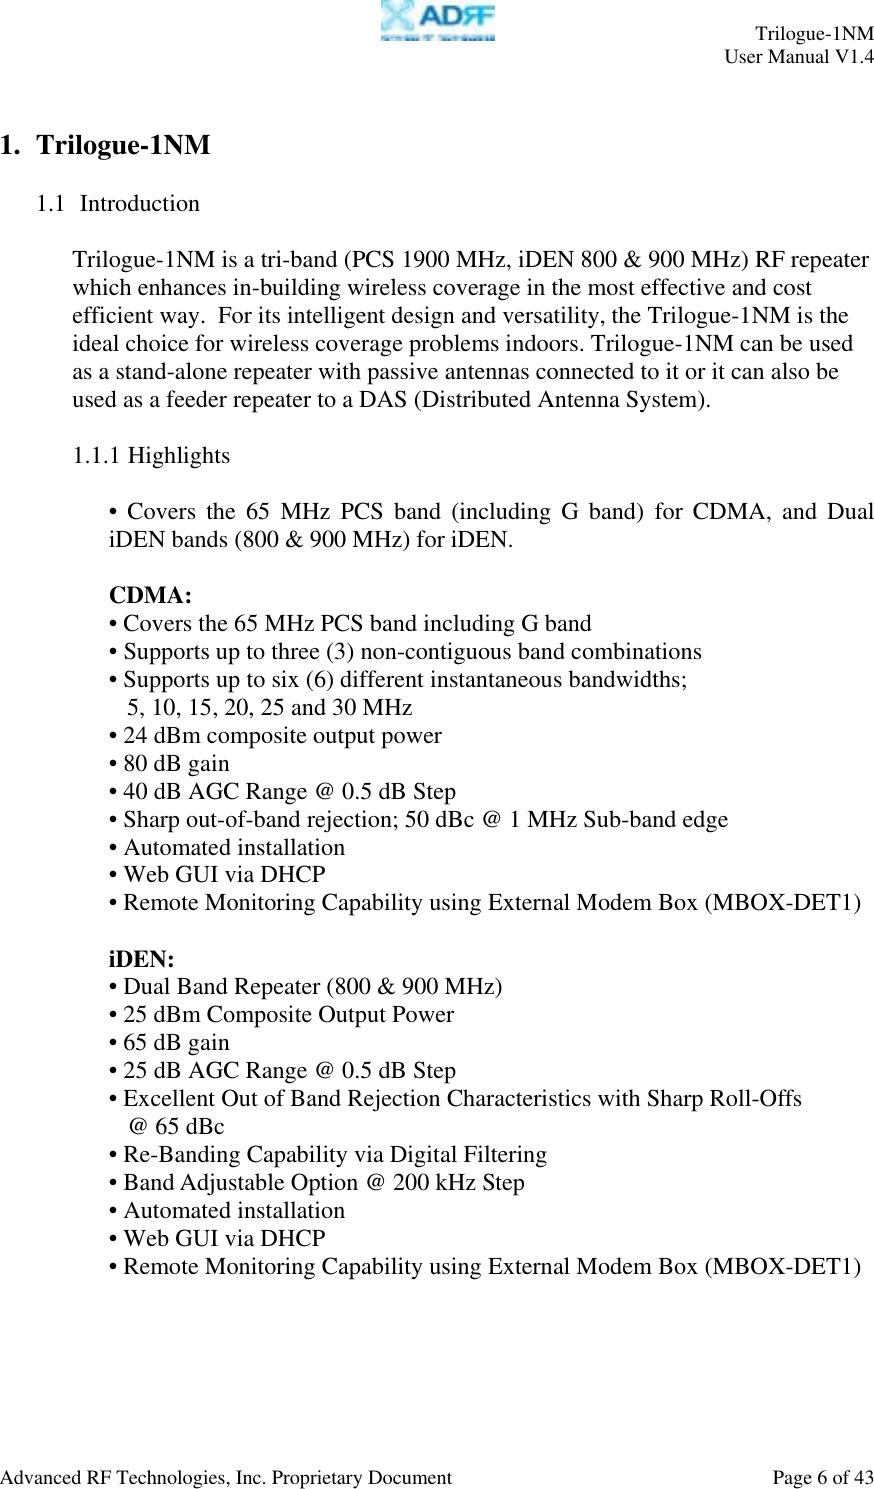     Trilogue-1NM User Manual V1.4  Advanced RF Technologies, Inc. Proprietary Document  Page 6 of 43  1. Trilogue-1NM  1.1  Introduction  Trilogue-1NM is a tri-band (PCS 1900 MHz, iDEN 800 &amp; 900 MHz) RF repeater which enhances in-building wireless coverage in the most effective and cost efficient way.  For its intelligent design and versatility, the Trilogue-1NM is the ideal choice for wireless coverage problems indoors. Trilogue-1NM can be used as a stand-alone repeater with passive antennas connected to it or it can also be used as a feeder repeater to a DAS (Distributed Antenna System).  1.1.1 Highlights  • Covers the 65 MHz PCS band (including G band) for CDMA, and Dual iDEN bands (800 &amp; 900 MHz) for iDEN.  CDMA: • Covers the 65 MHz PCS band including G band • Supports up to three (3) non-contiguous band combinations • Supports up to six (6) different instantaneous bandwidths;  5, 10, 15, 20, 25 and 30 MHz • 24 dBm composite output power • 80 dB gain • 40 dB AGC Range @ 0.5 dB Step • Sharp out-of-band rejection; 50 dBc @ 1 MHz Sub-band edge • Automated installation • Web GUI via DHCP  • Remote Monitoring Capability using External Modem Box (MBOX-DET1)  iDEN: • Dual Band Repeater (800 &amp; 900 MHz) • 25 dBm Composite Output Power • 65 dB gain • 25 dB AGC Range @ 0.5 dB Step • Excellent Out of Band Rejection Characteristics with Sharp Roll-Offs     @ 65 dBc • Re-Banding Capability via Digital Filtering • Band Adjustable Option @ 200 kHz Step • Automated installation • Web GUI via DHCP  • Remote Monitoring Capability using External Modem Box (MBOX-DET1)  